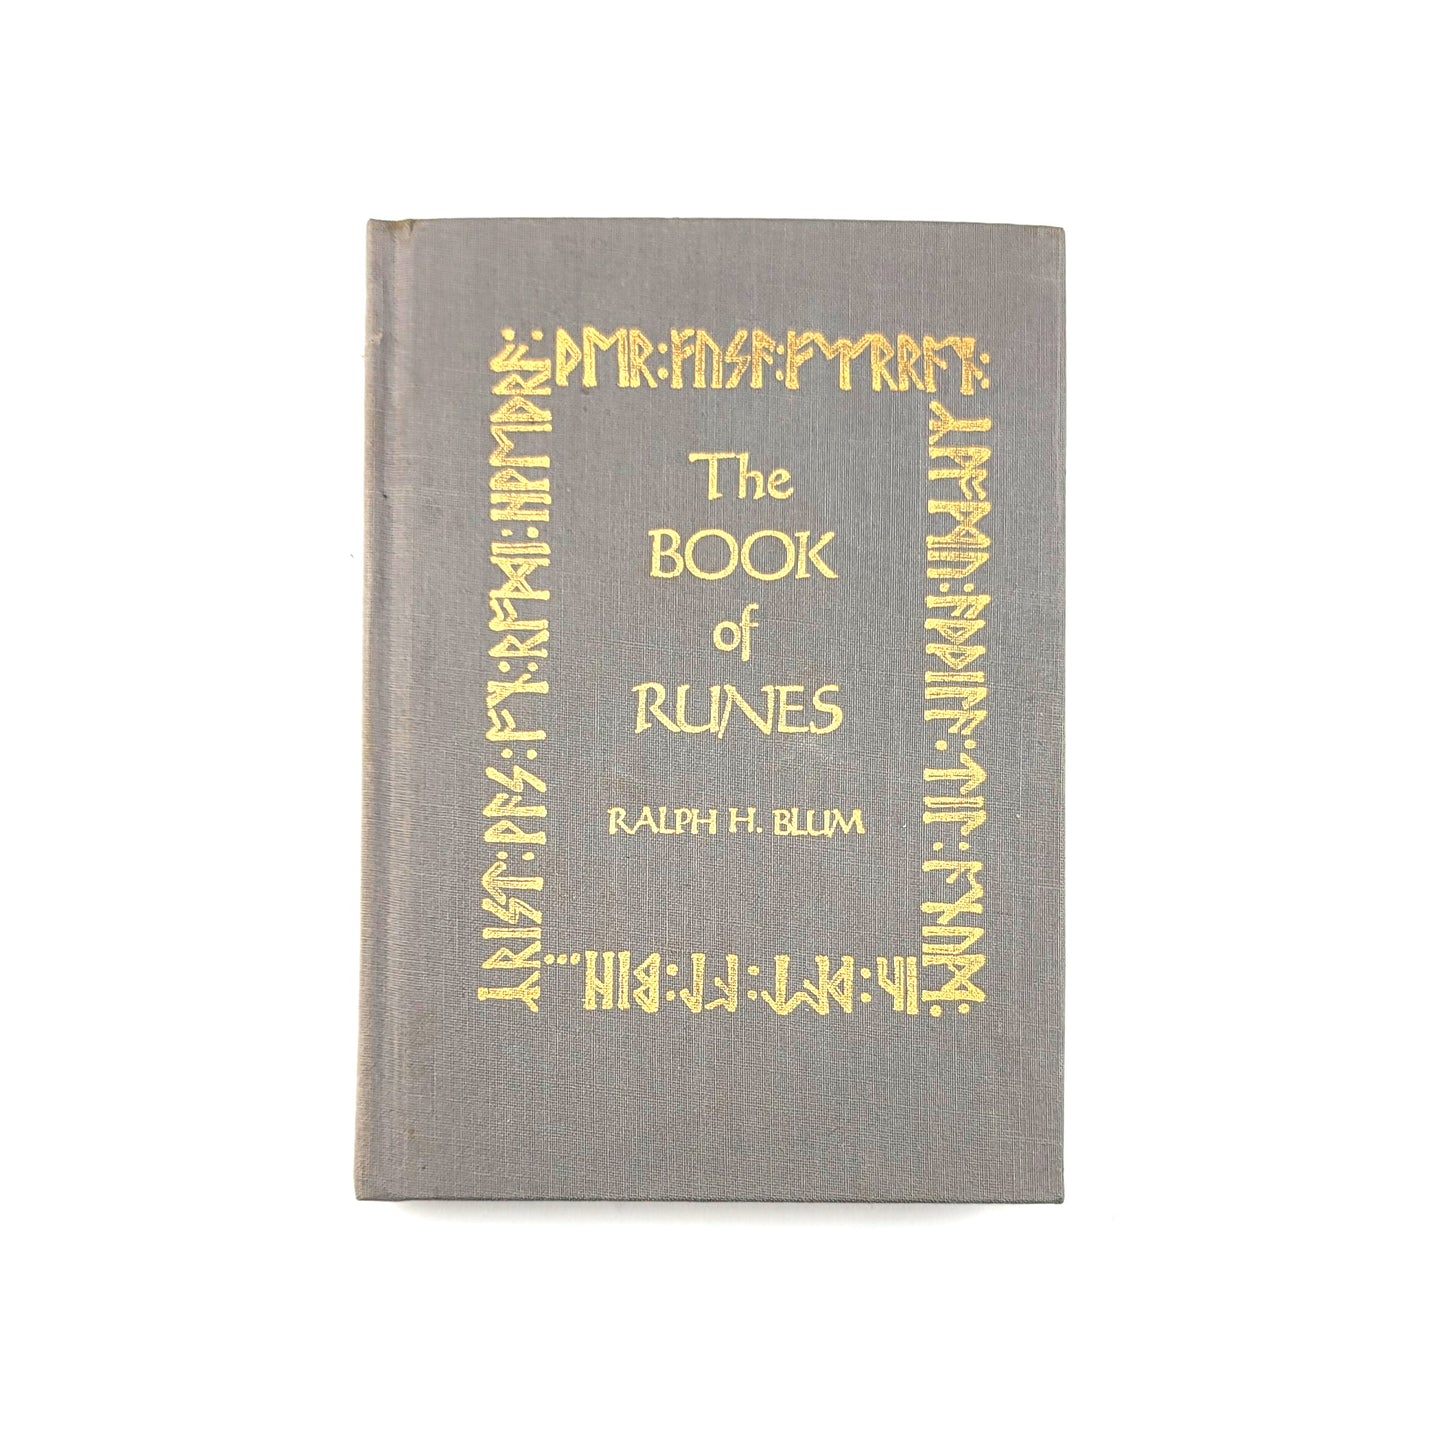 The Book of Runes: A Handbook for the Use of an Ancient Oracle, the Viking Runes by Ralph H. Blum